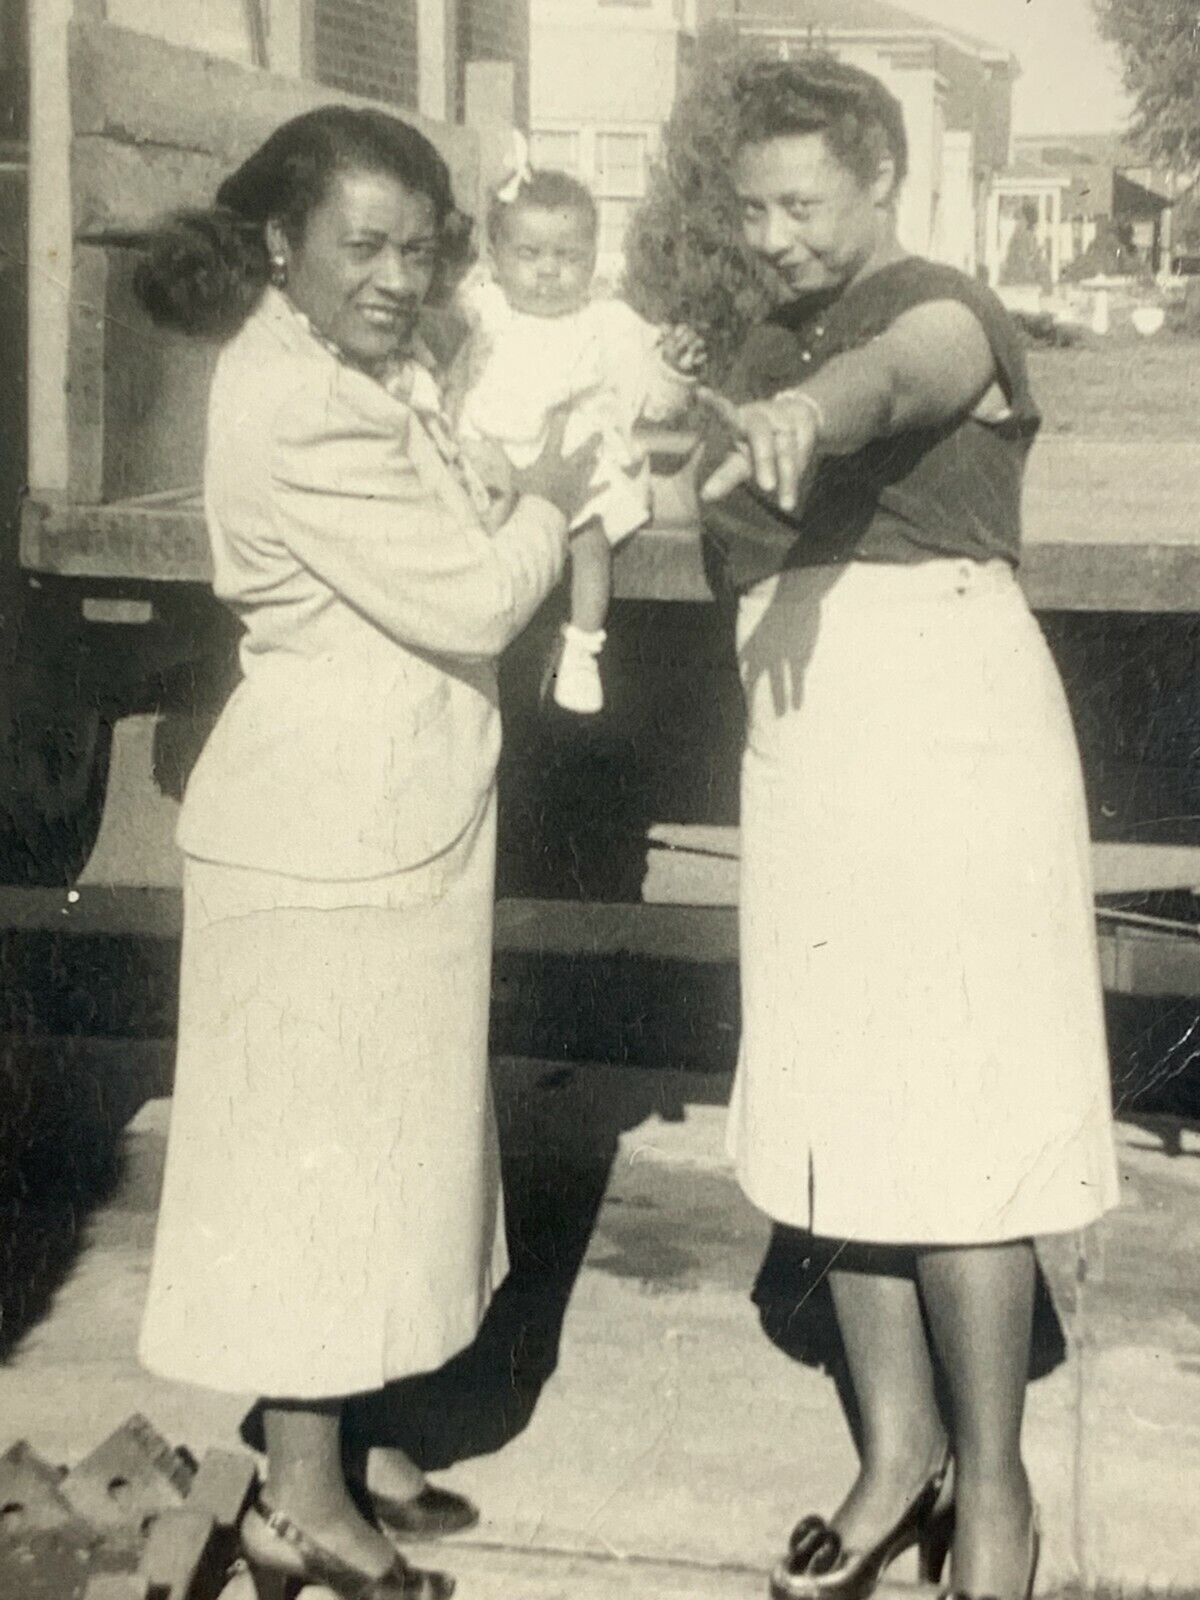 (AmJ) FOUND Photo Photograph African American Women Baby 1940\'s-1950\'s Pointing